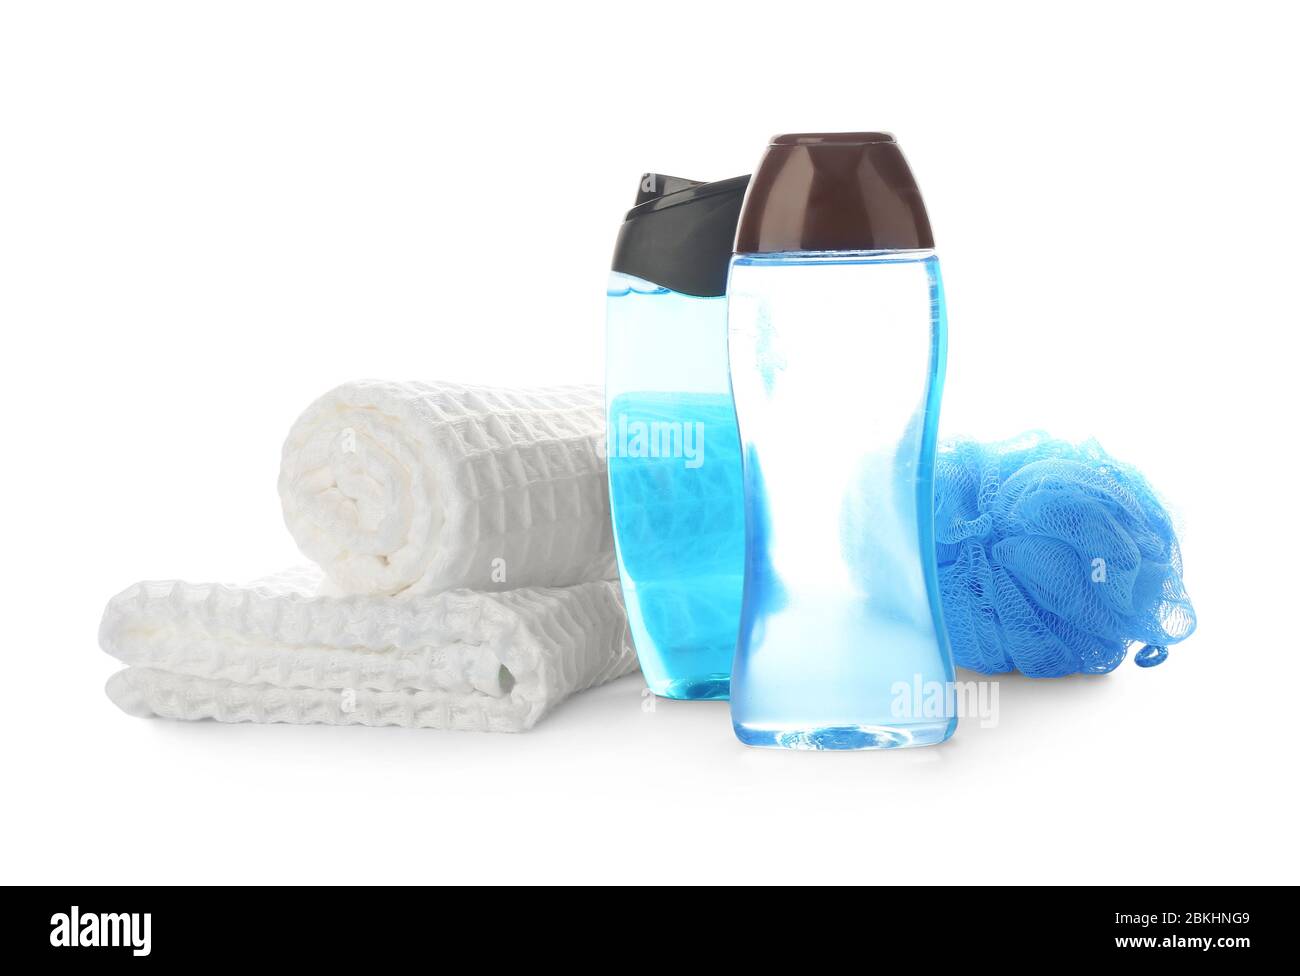 Shower gels, towel and loofah on white background Stock Photo